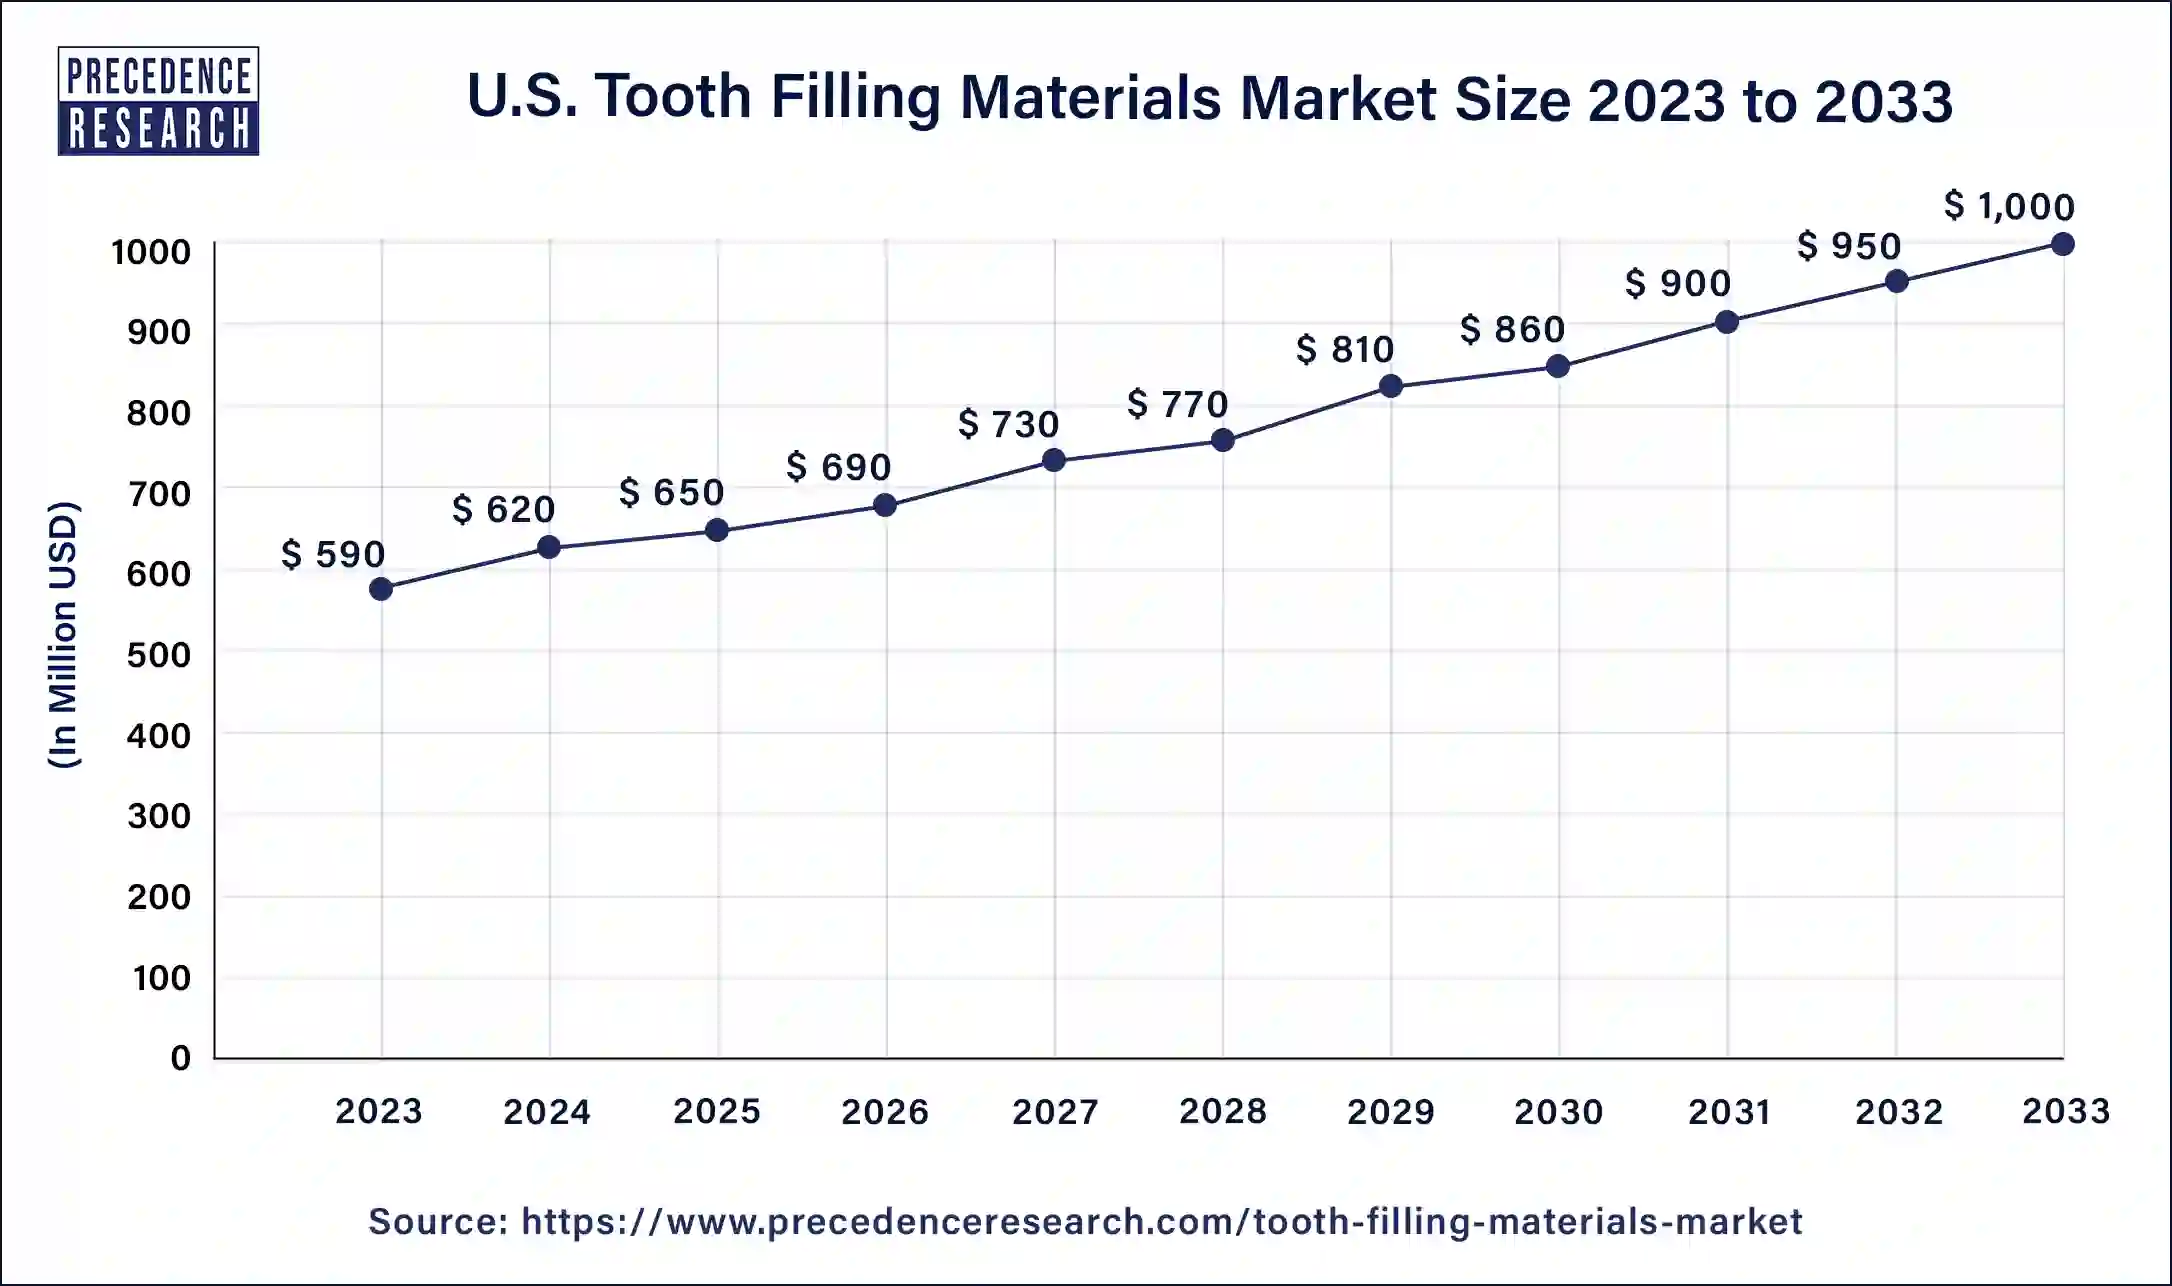 U.S. Tooth Filling Materials Market Size 2024 to 2033